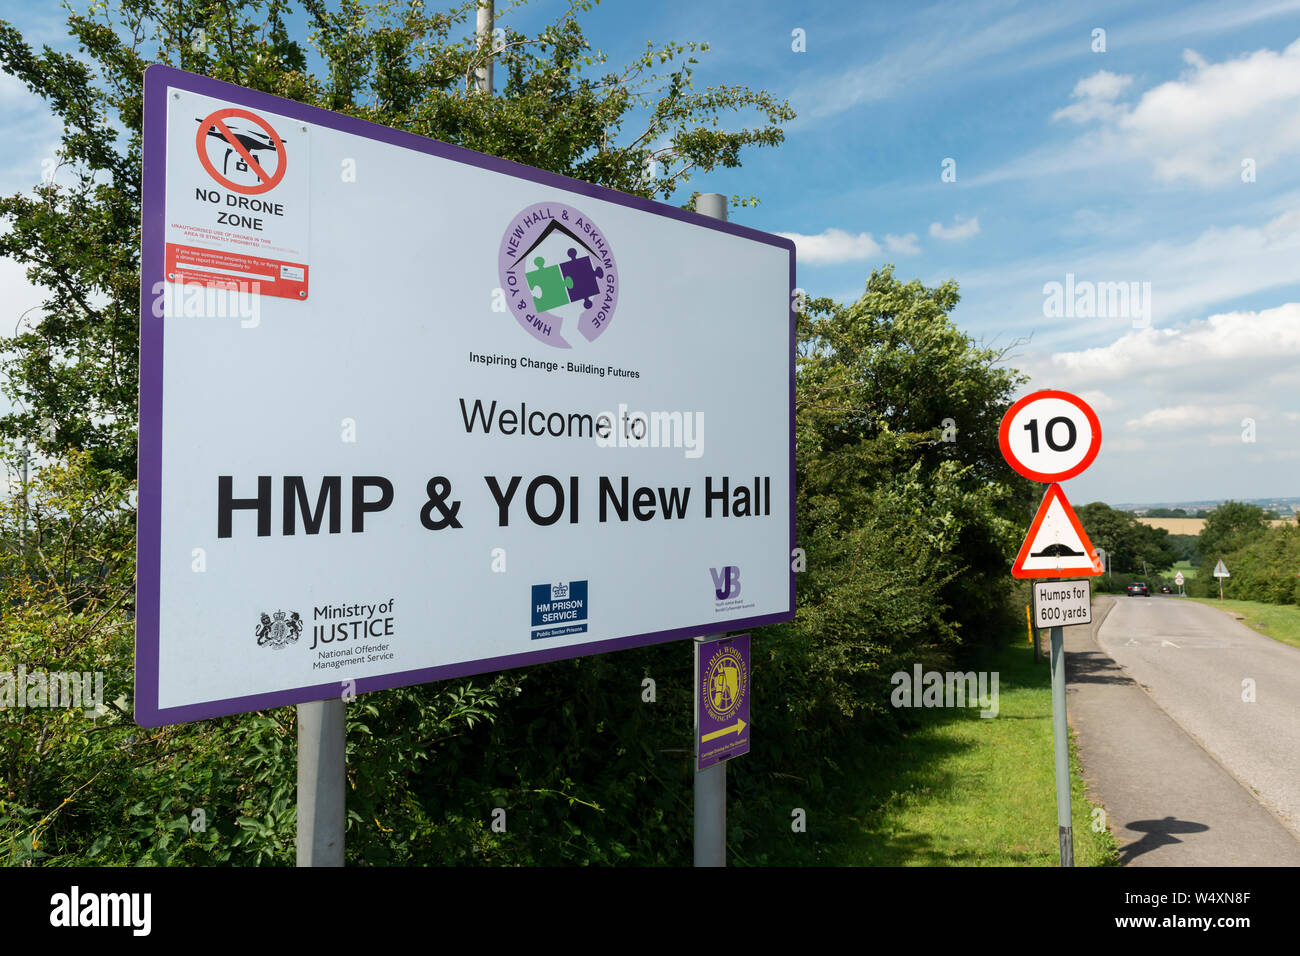 Signage for HM Prison New Hall in Flockton, West Yorkshire, UK. Stock Photo